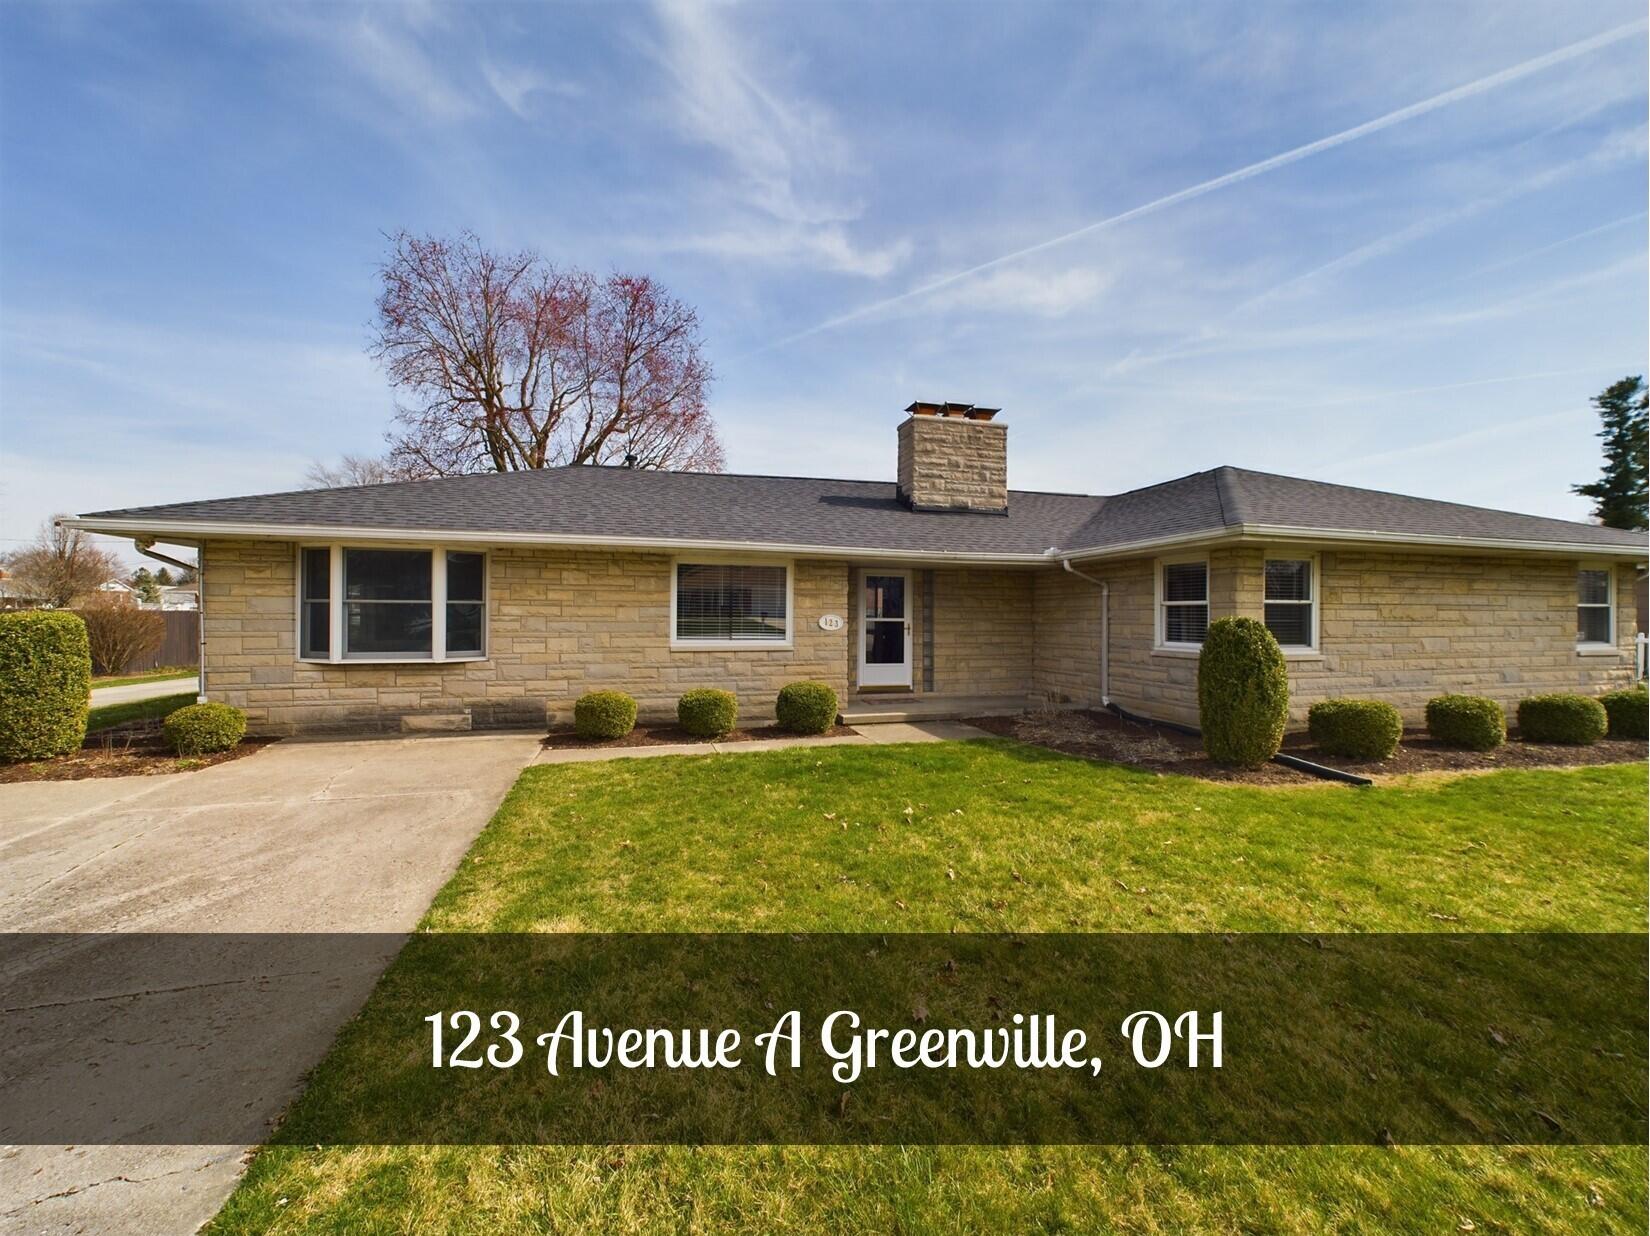 View Greenville, OH 45331 house